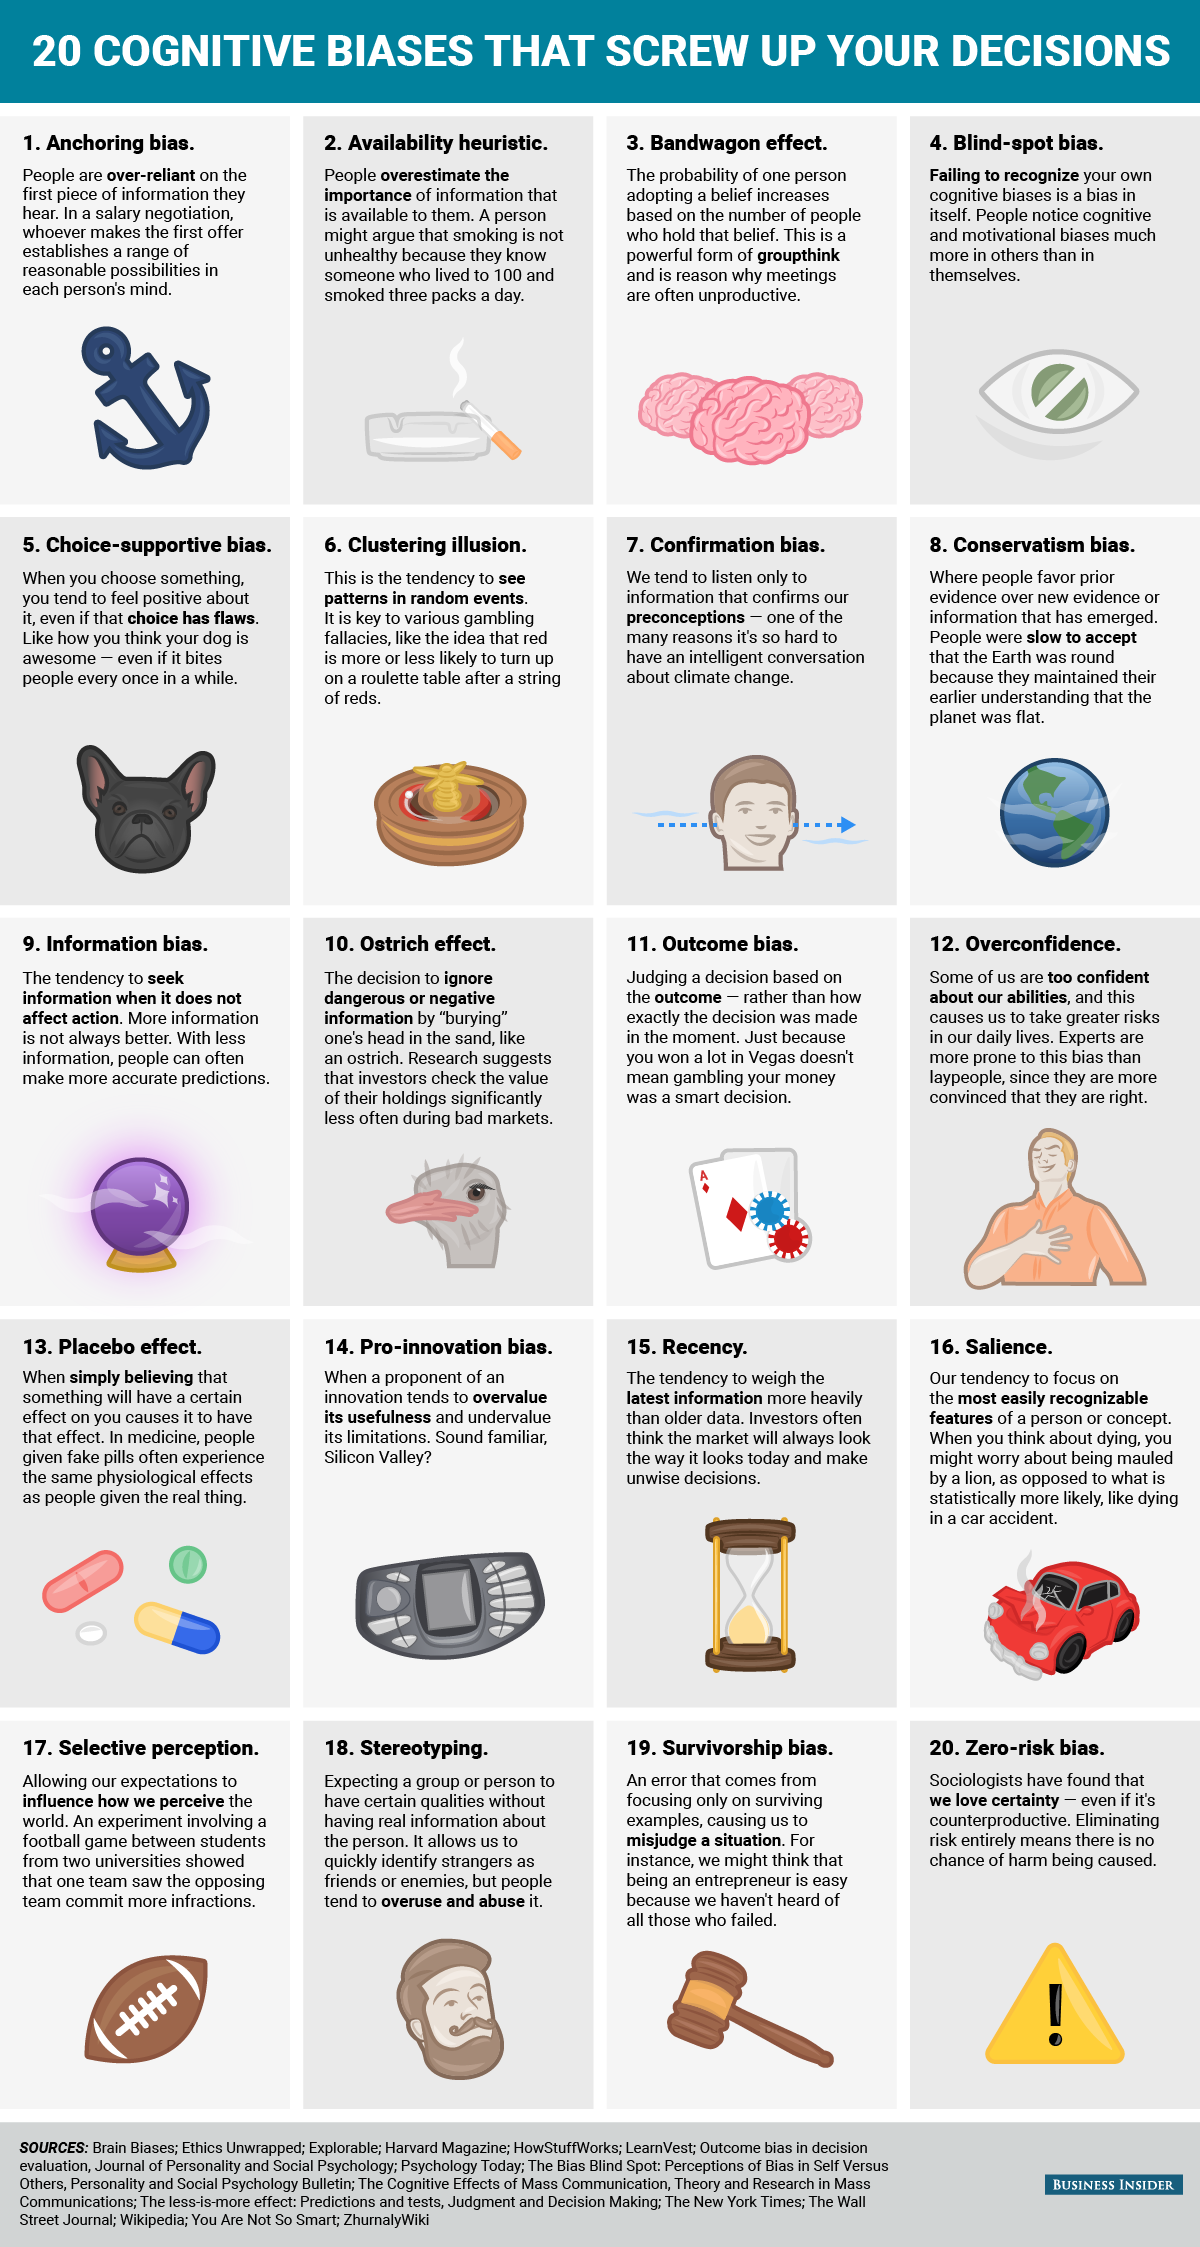 20 cognitive biases that affect your decisions